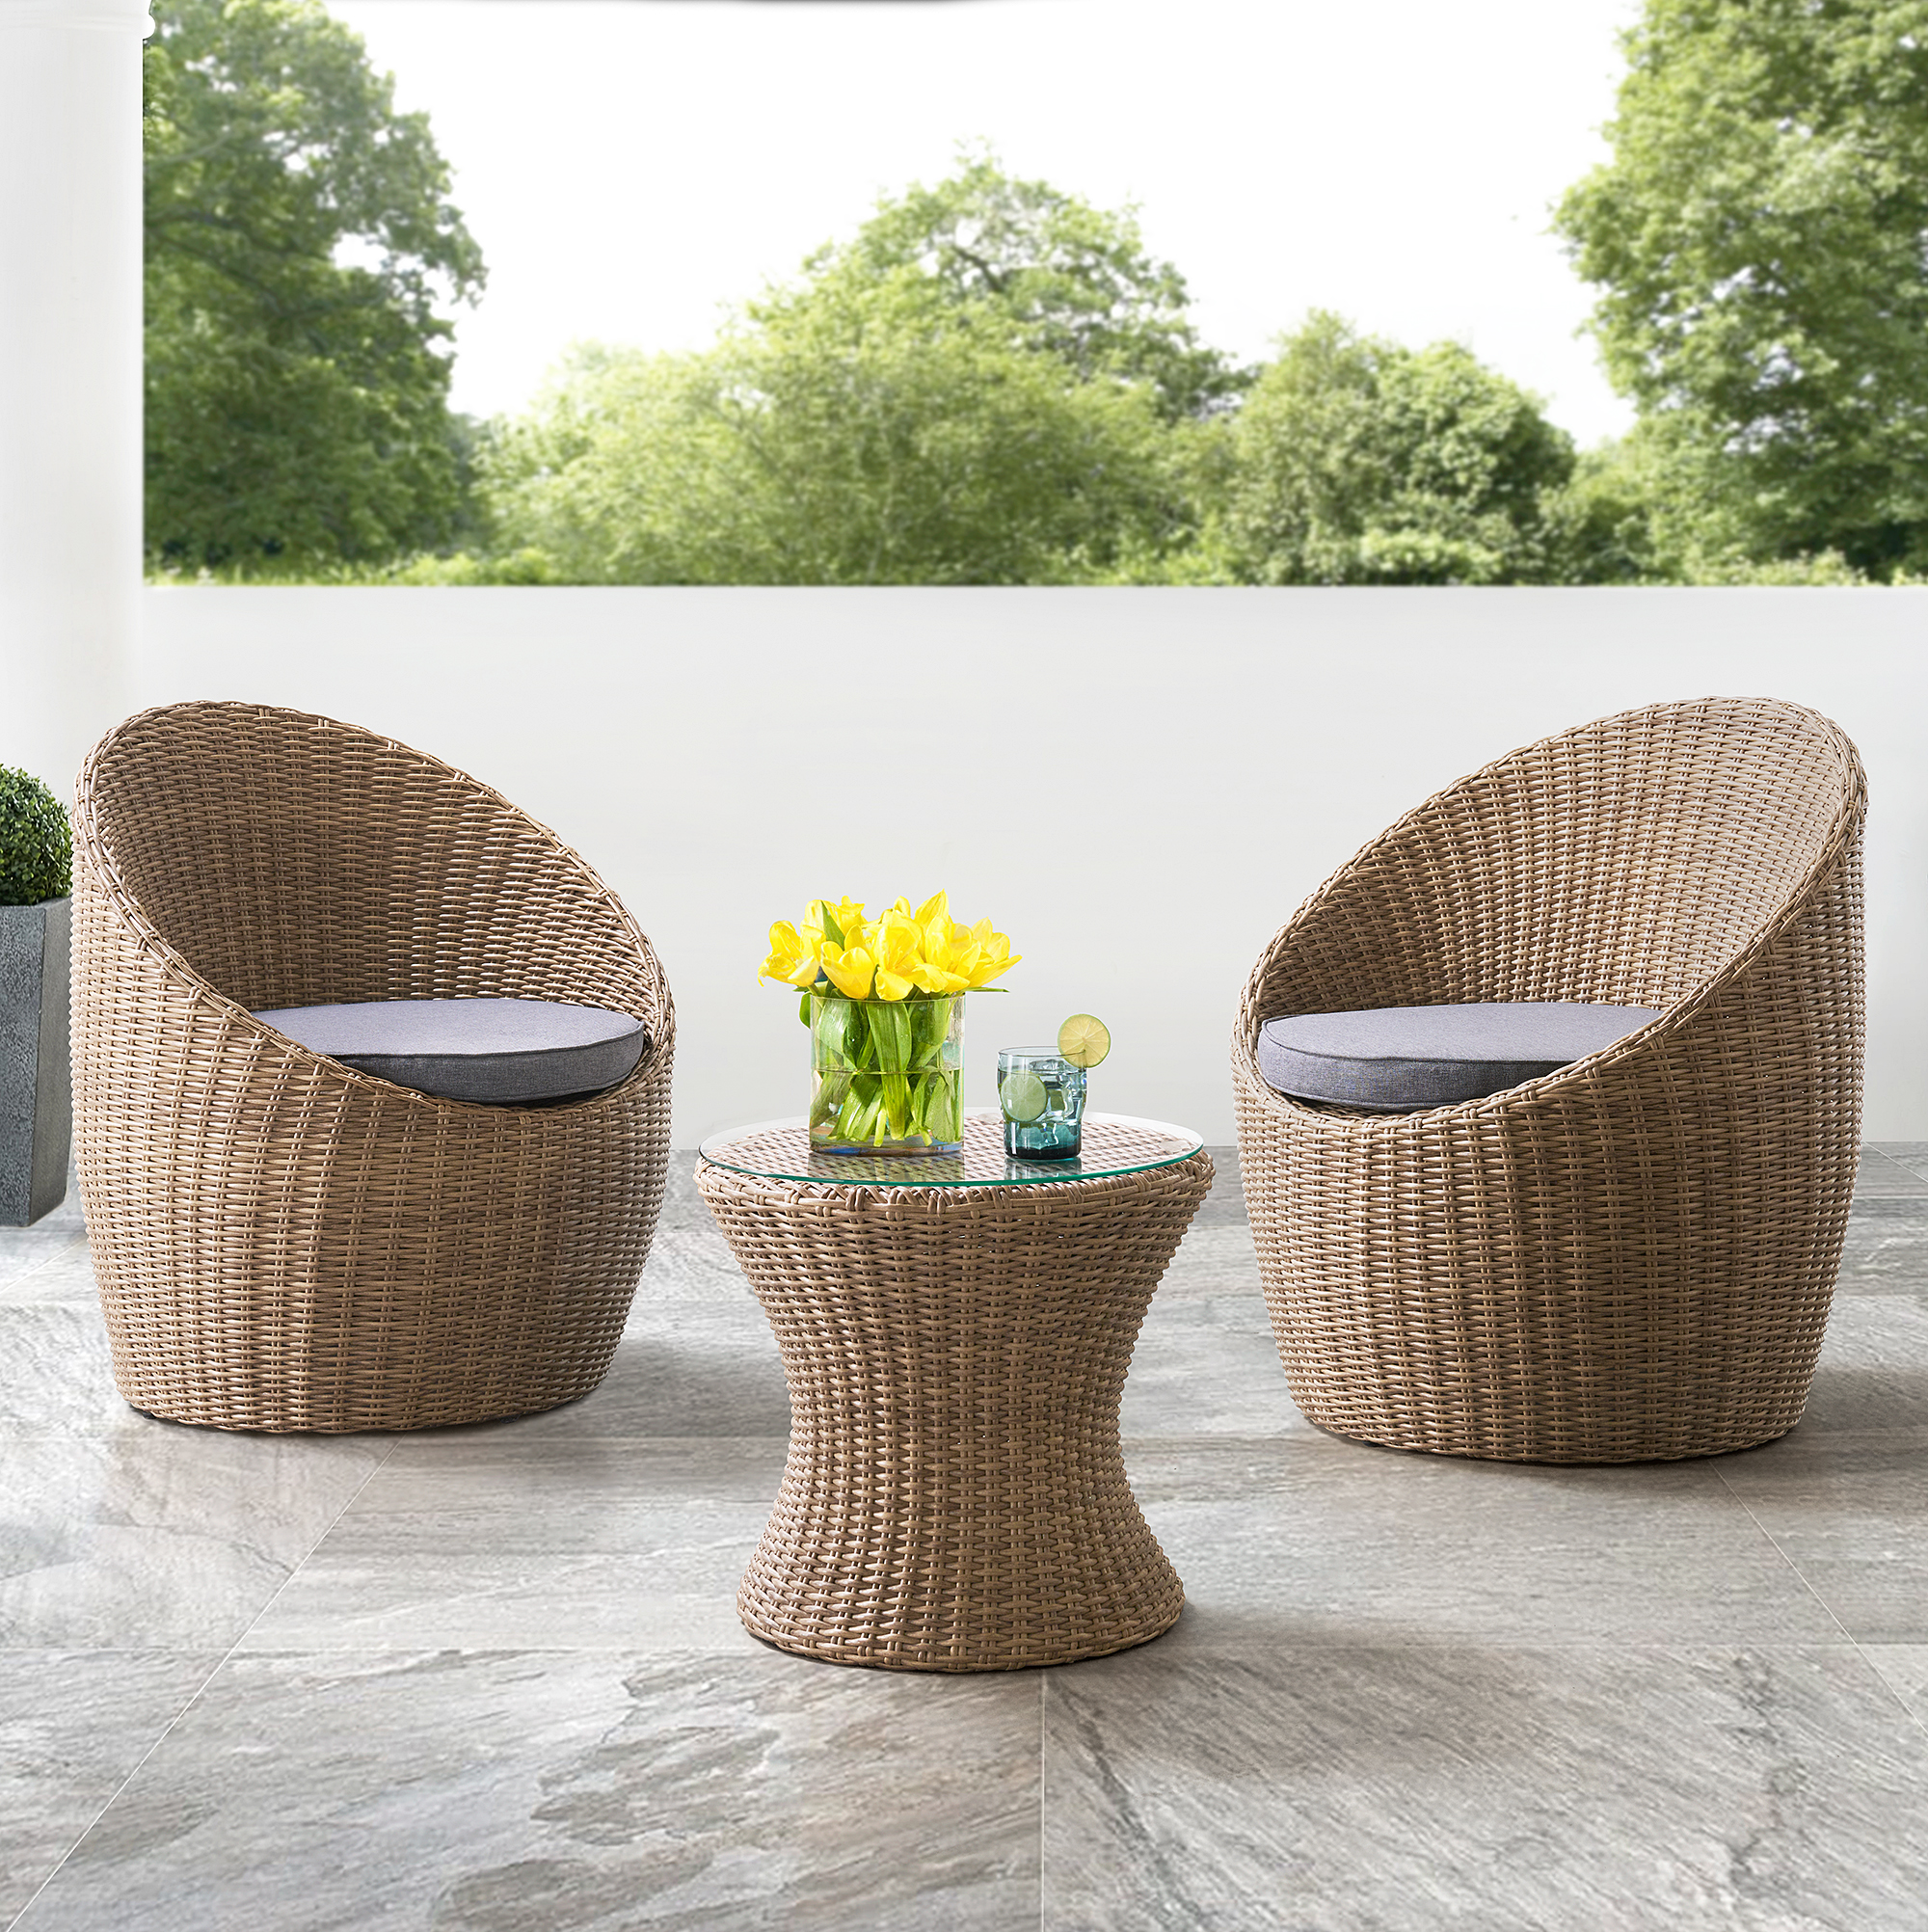 Strafford All-Weather Wicker Outdoor Set with Two Chairs and 18"H Cocktail Table - image 1 of 6